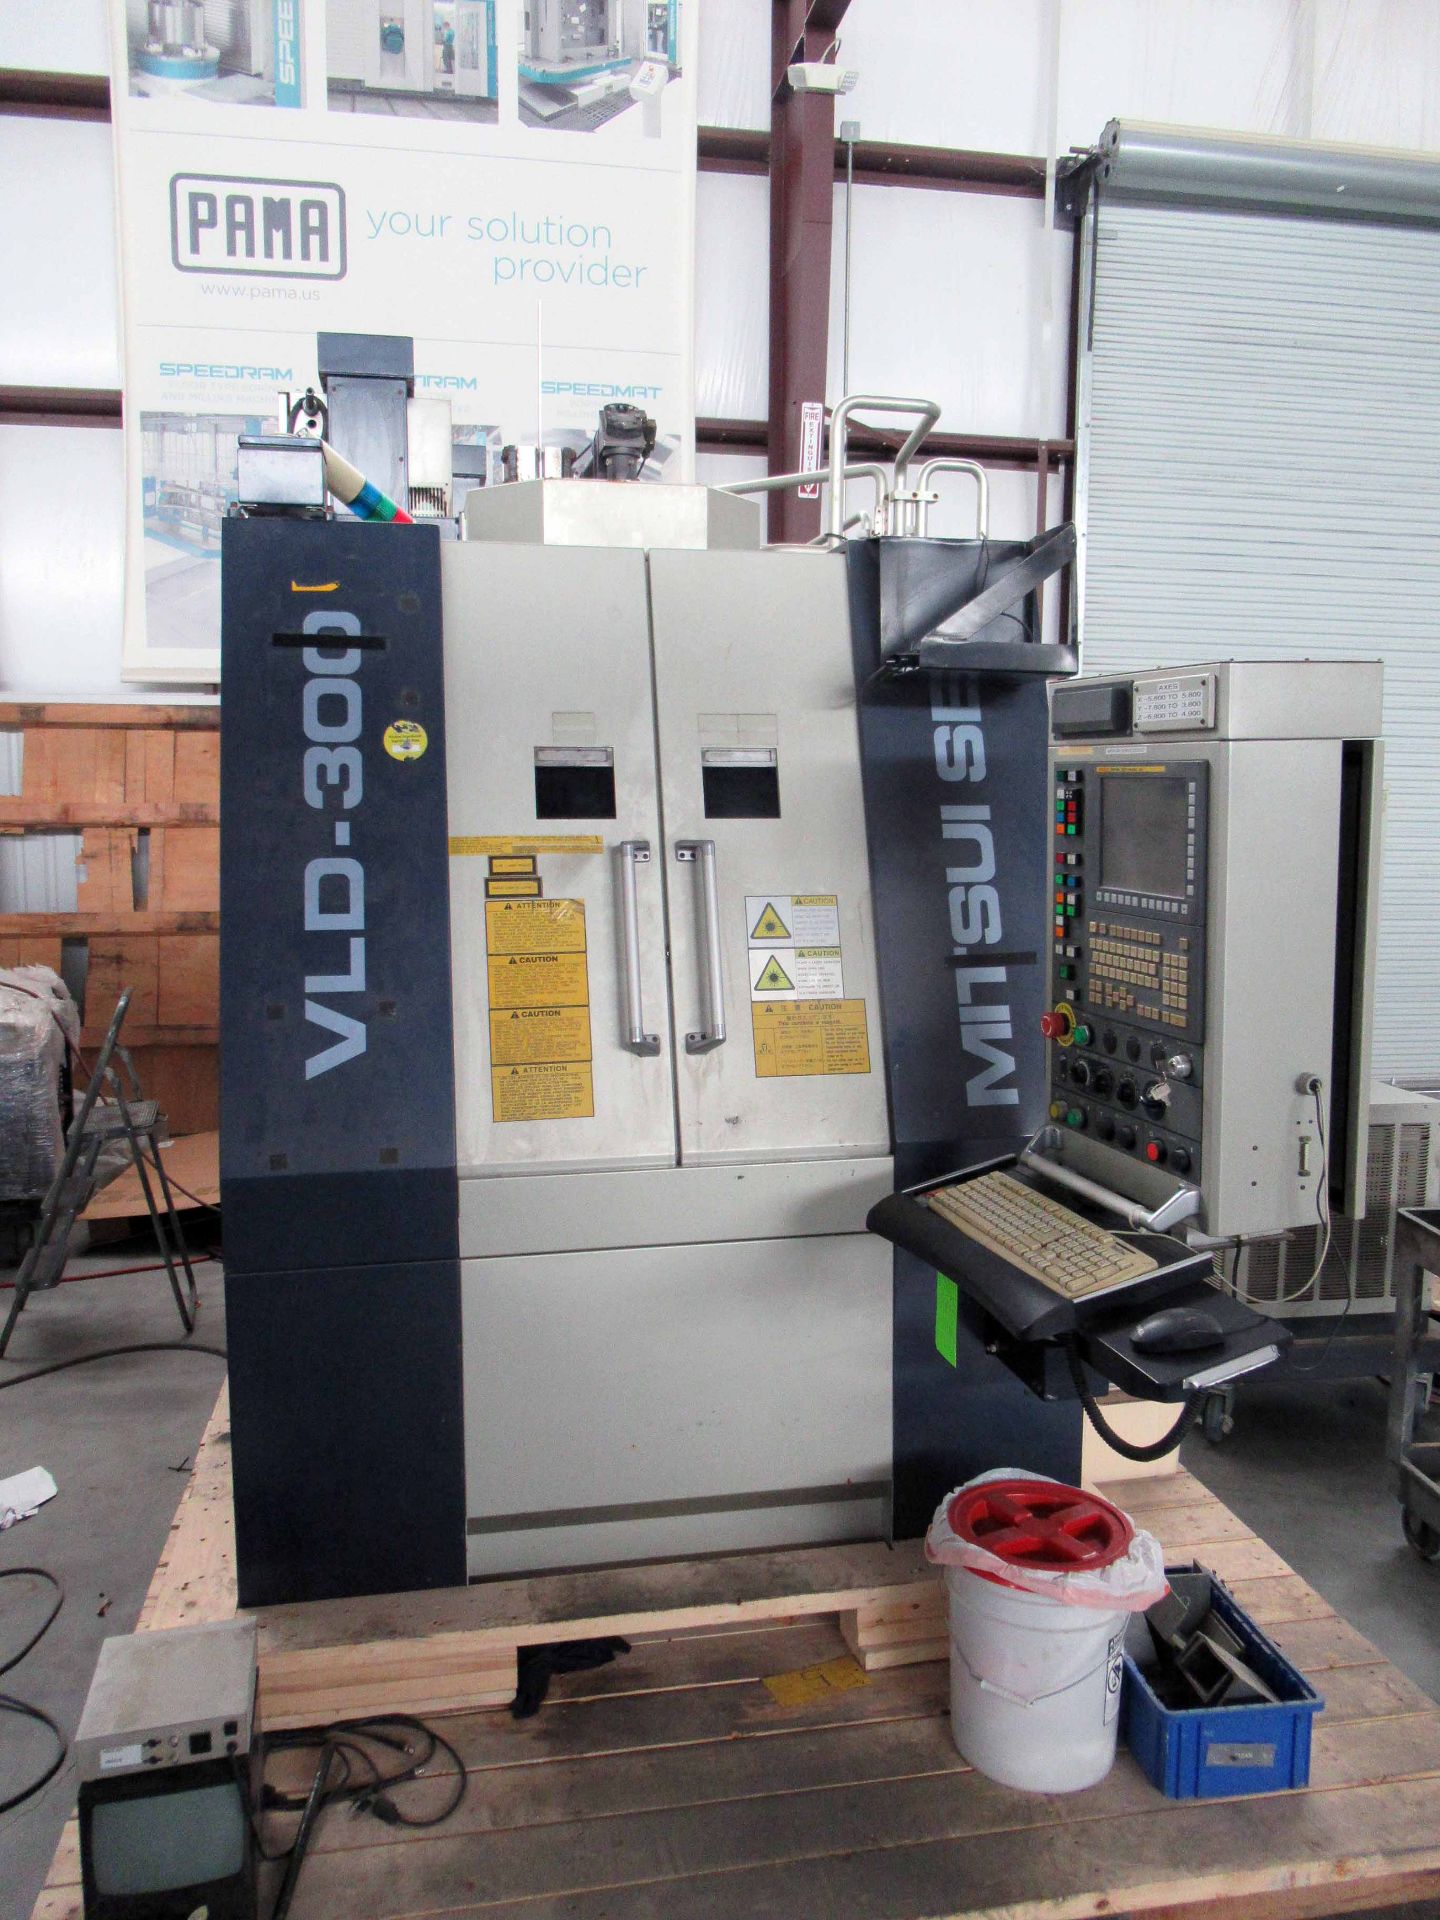 5-AXIS CNC LASER DRILLING MACHINE, MITSUI SEIKI MDL. VLD-300, new 2008, Fanuc series 310i- Mdl. A5